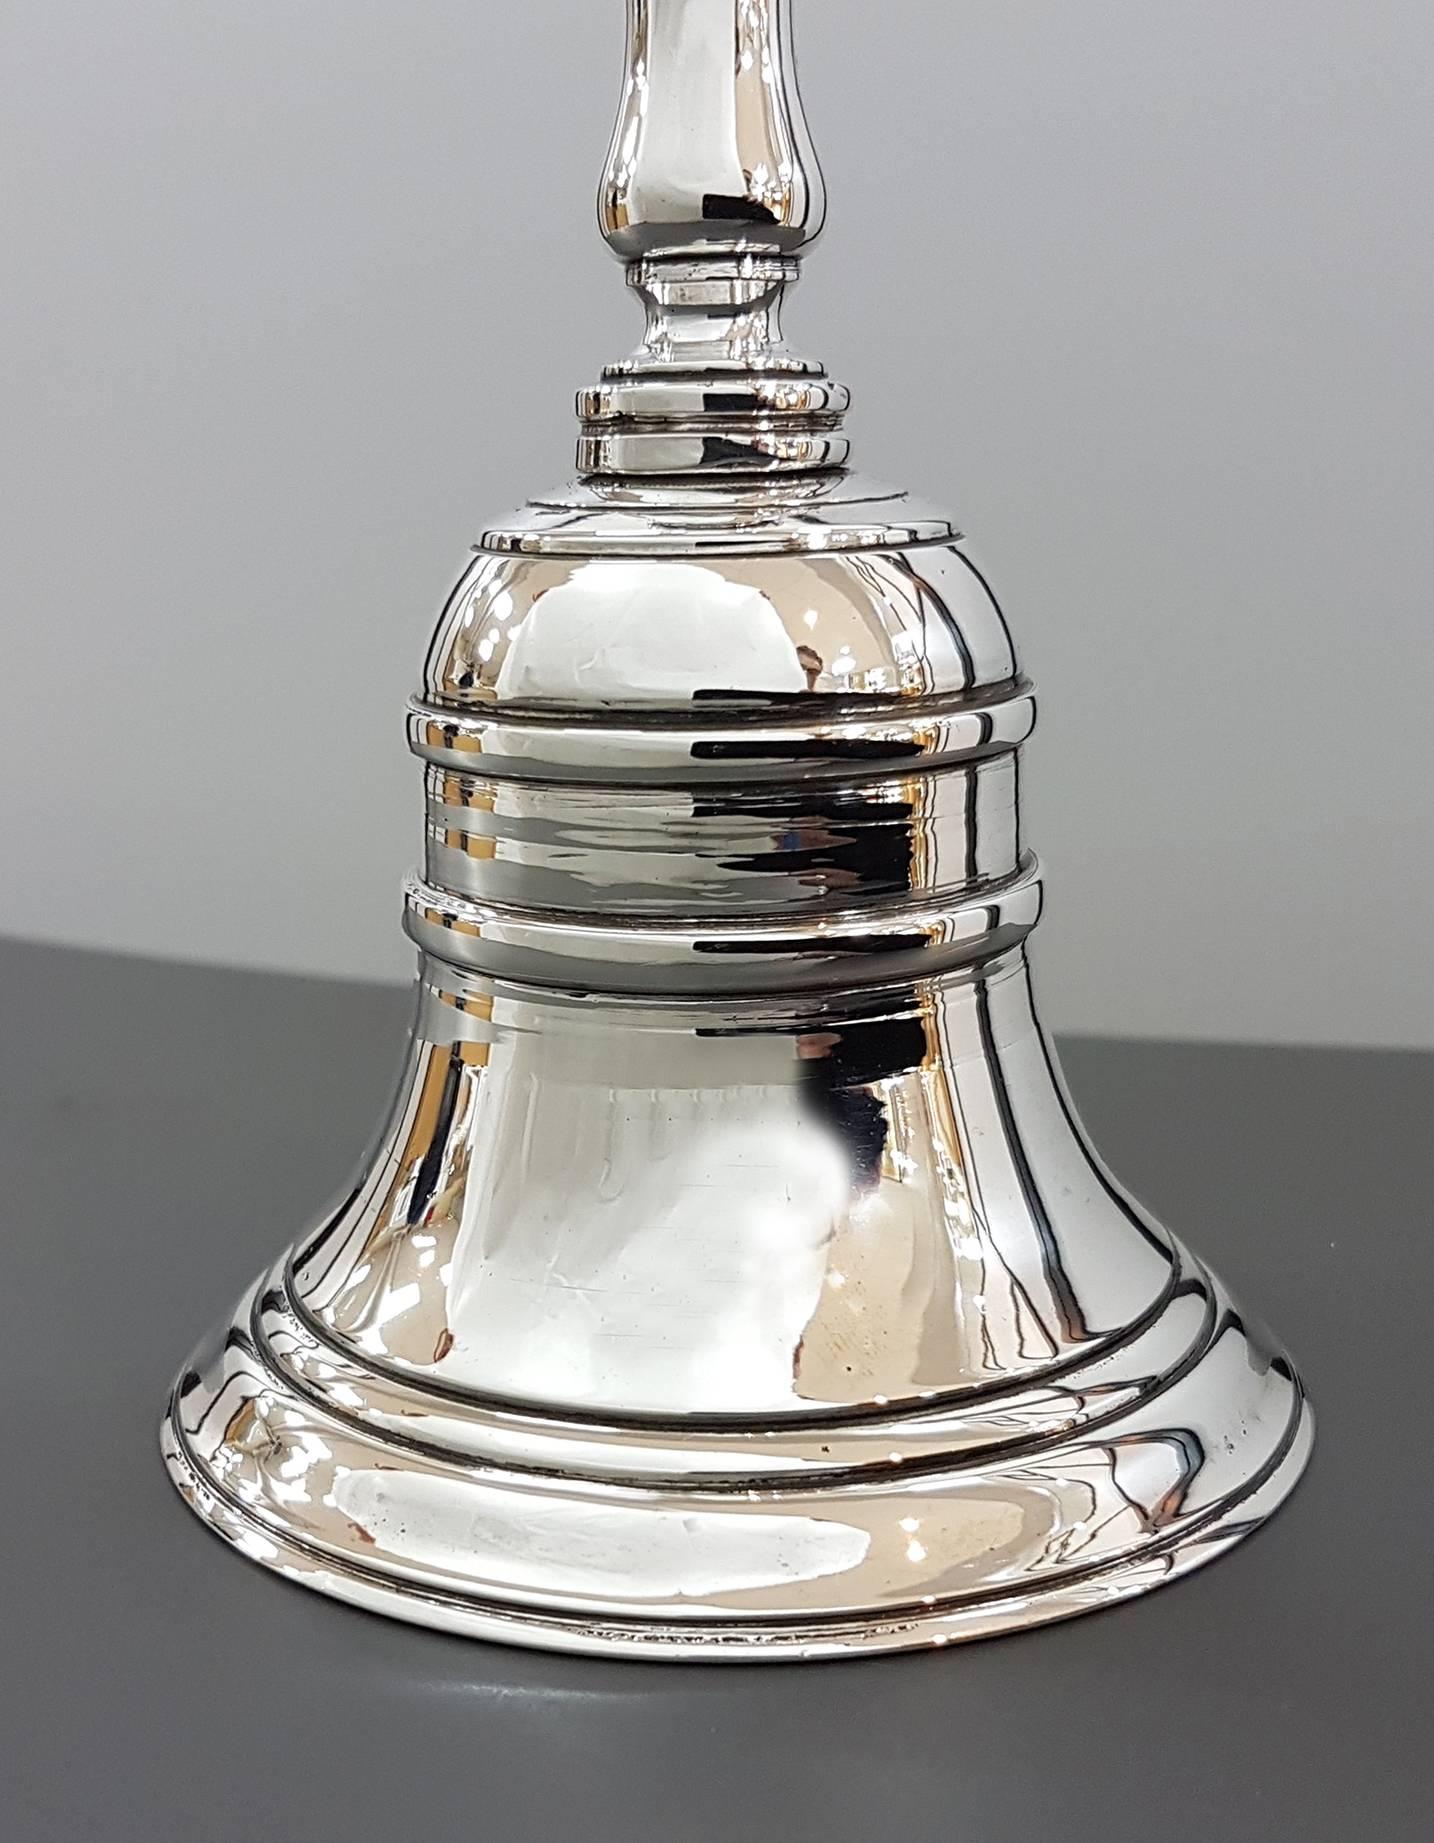 Table bell in sterling silver.
Made of cast and smooth finish with double lines
Shaped handle.

gr. 450.